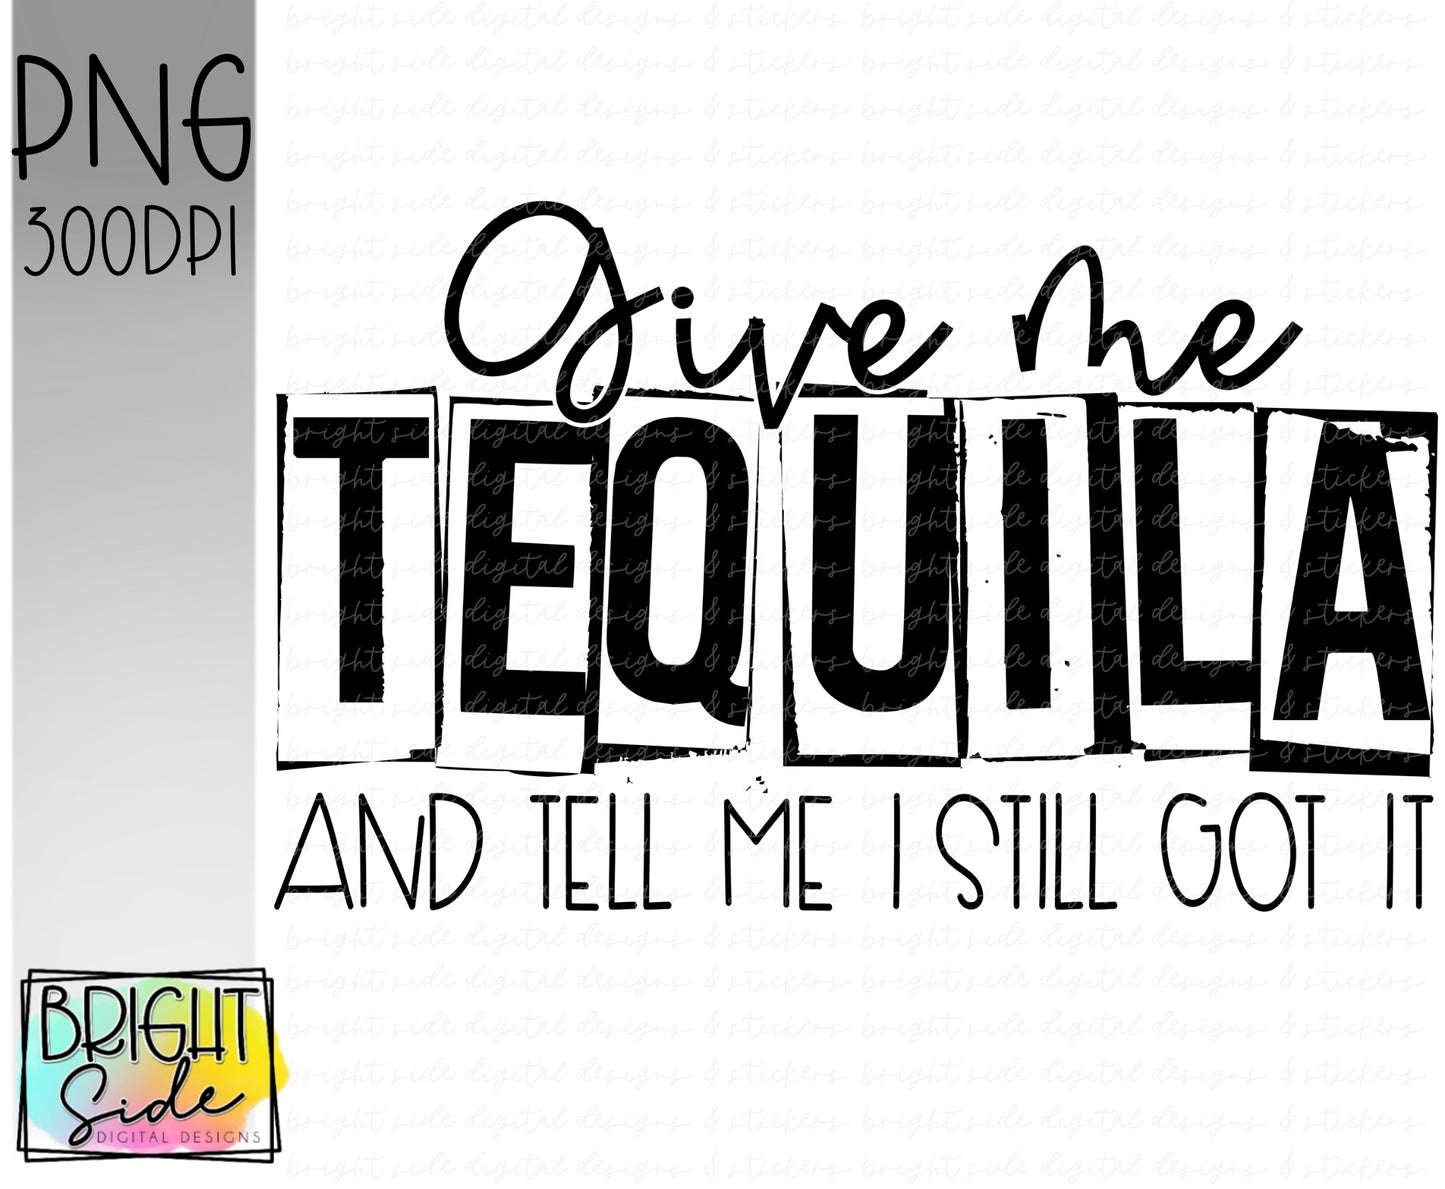 Give me tequila